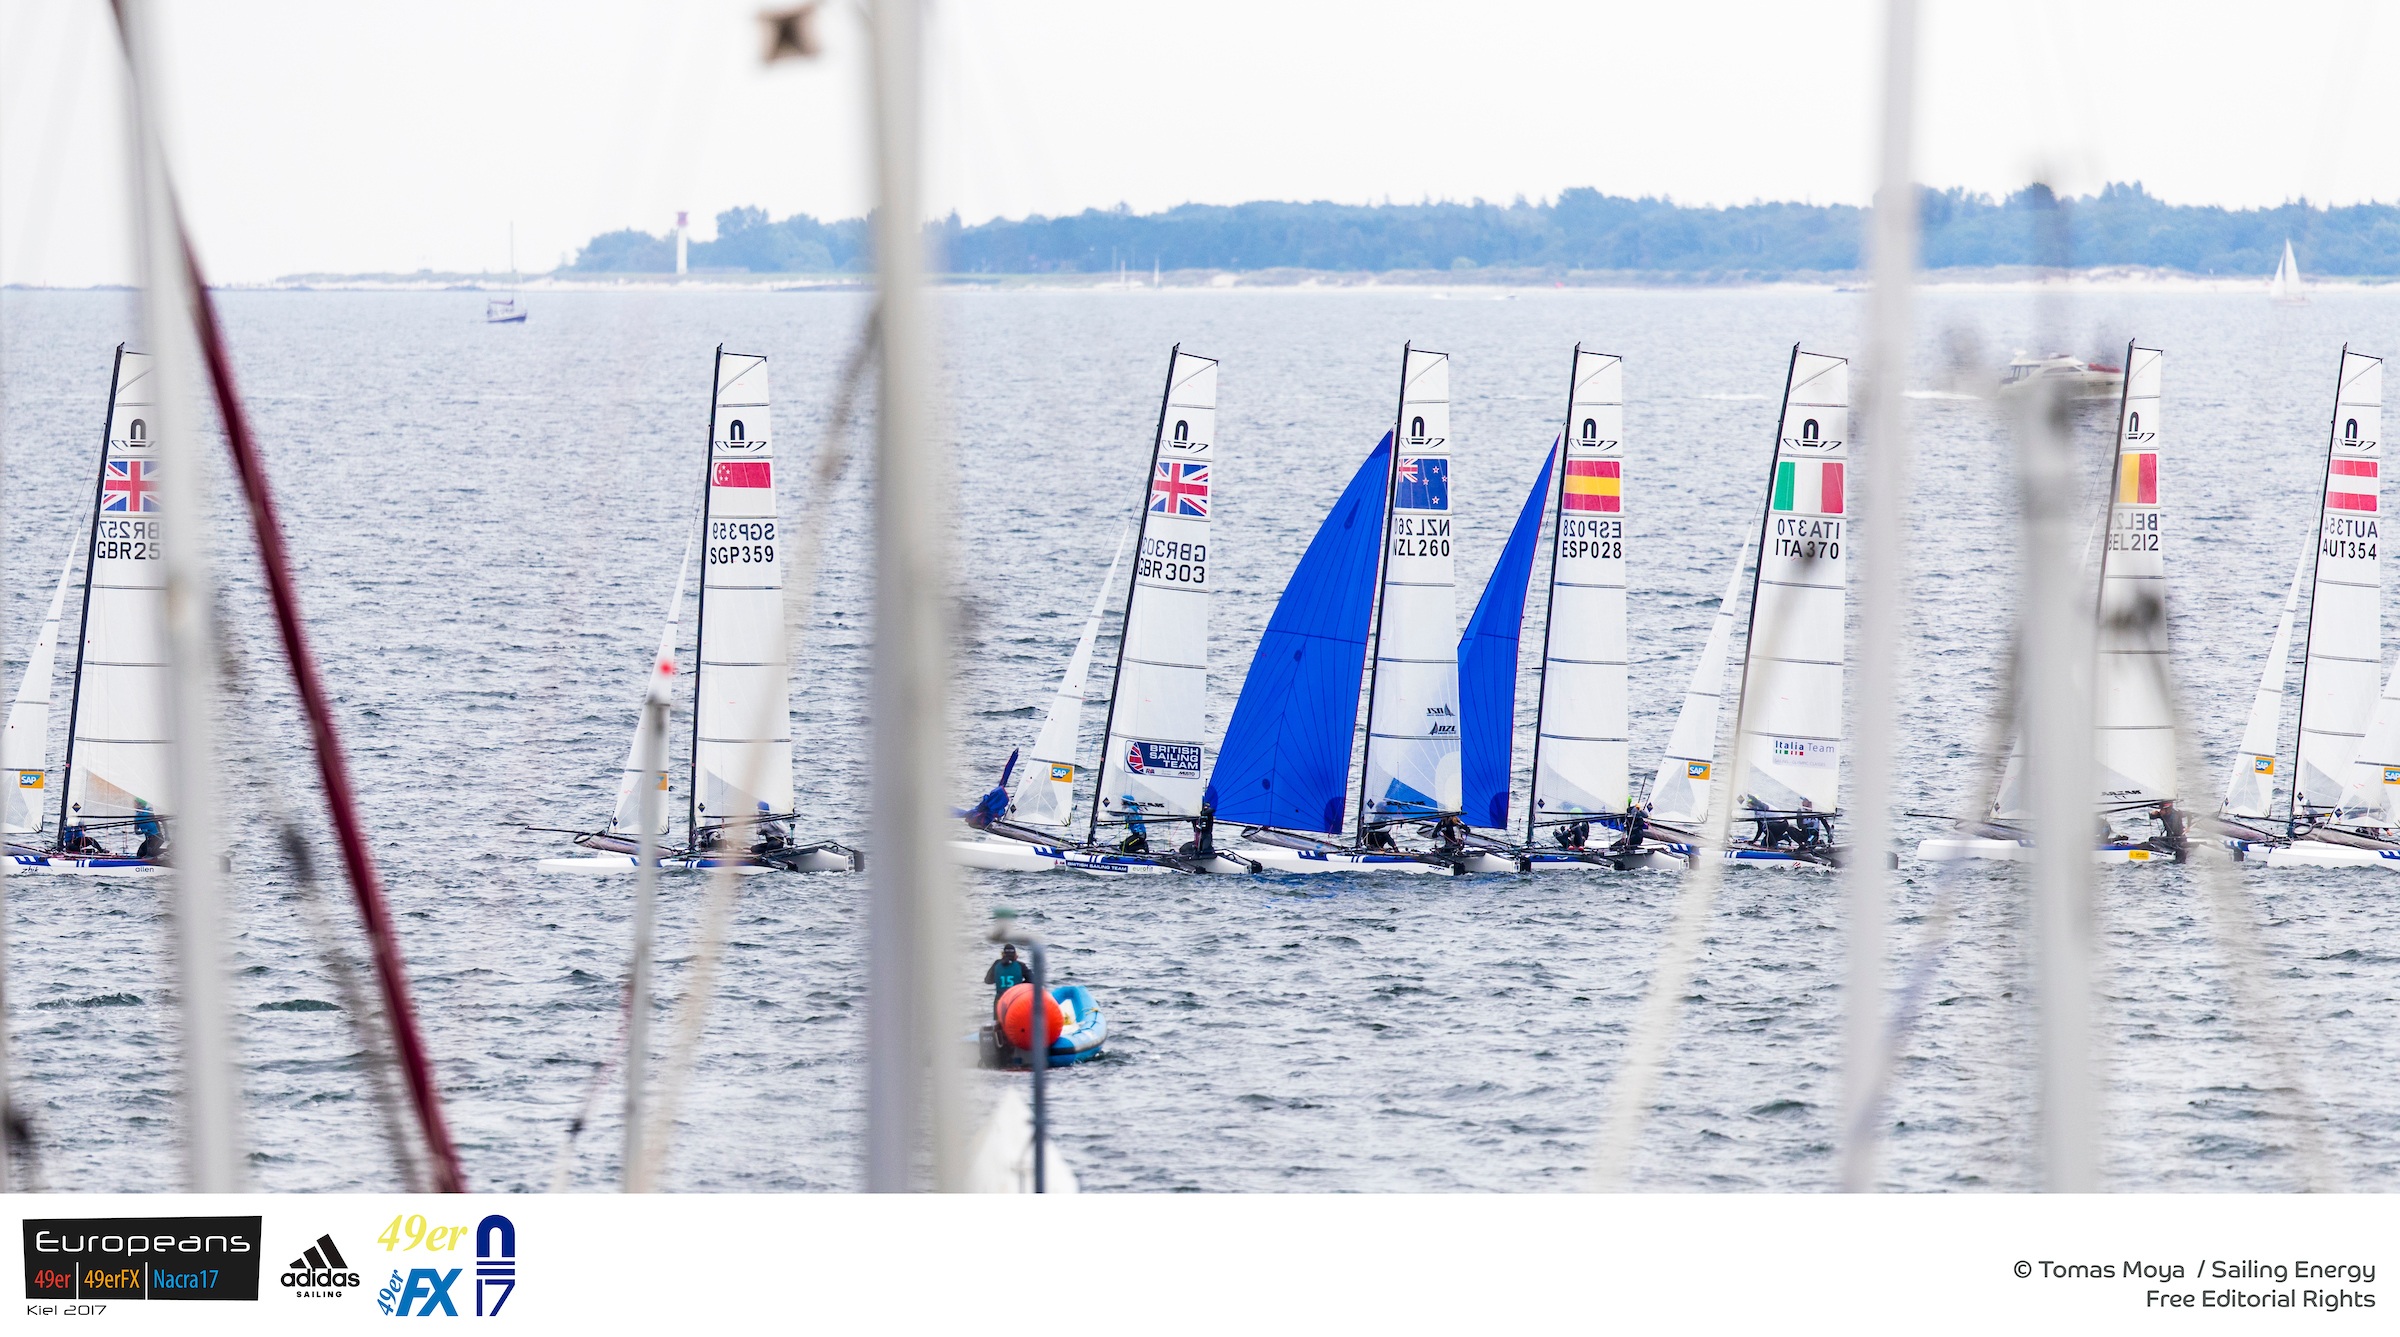 Racers Find Obstacles and Opportunities As Qualification Round Ends At European Championships